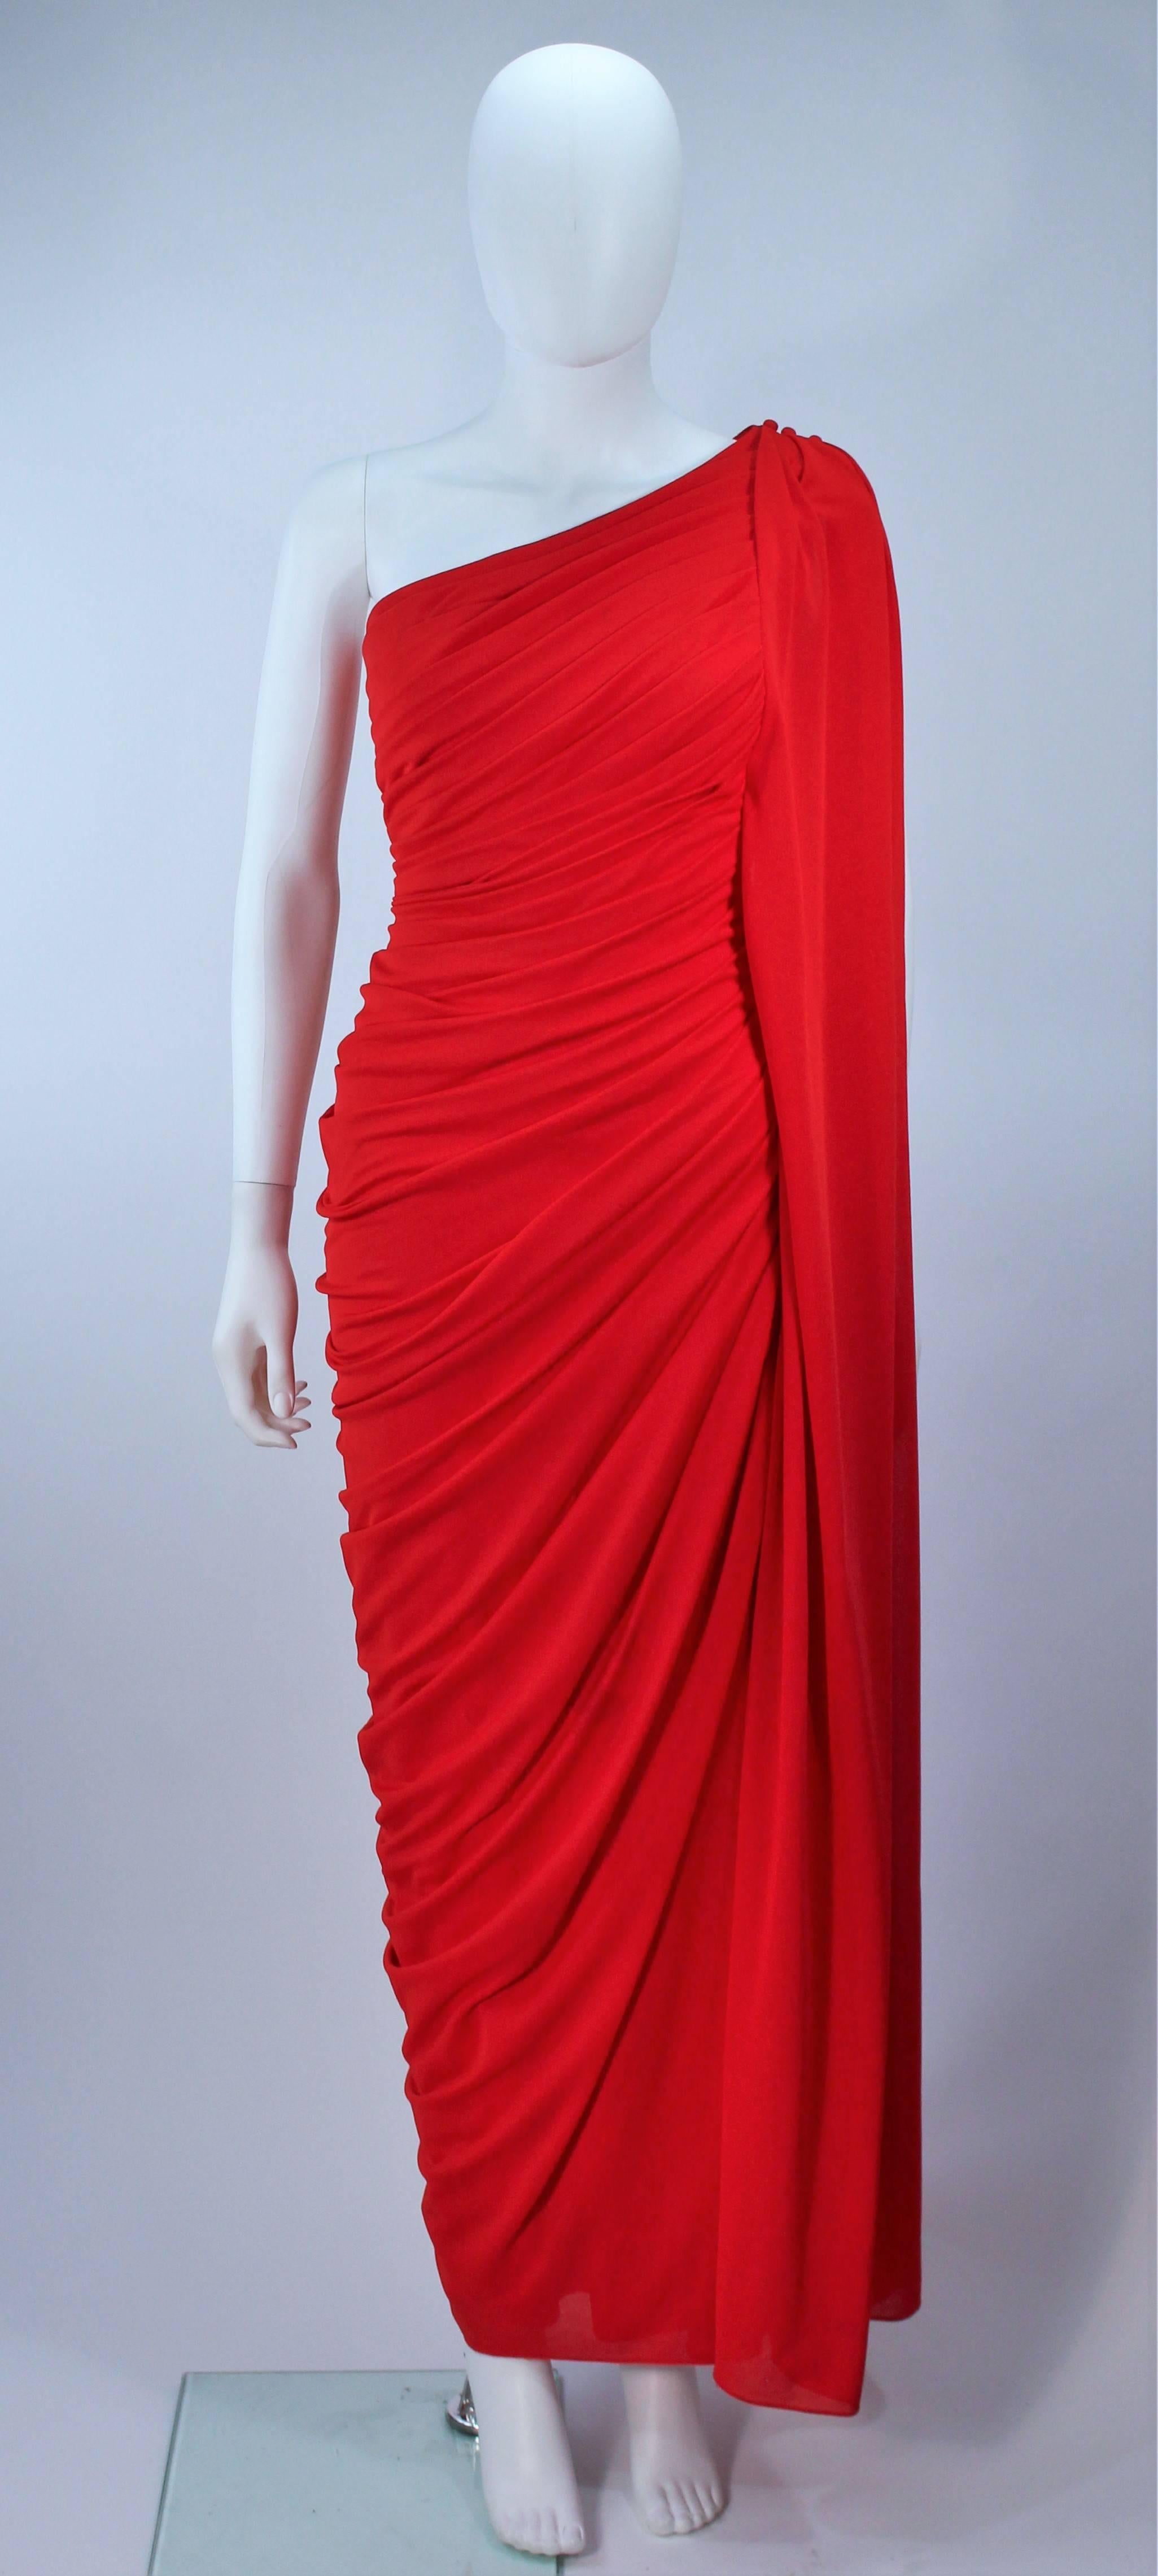 This Estevez  gown is composed of a red jersey. Features a gathered an draped design with side zipper closure, and button closures at the shoulder. In great vintage condition, excellent design. There is a spot on the front of the dress which may